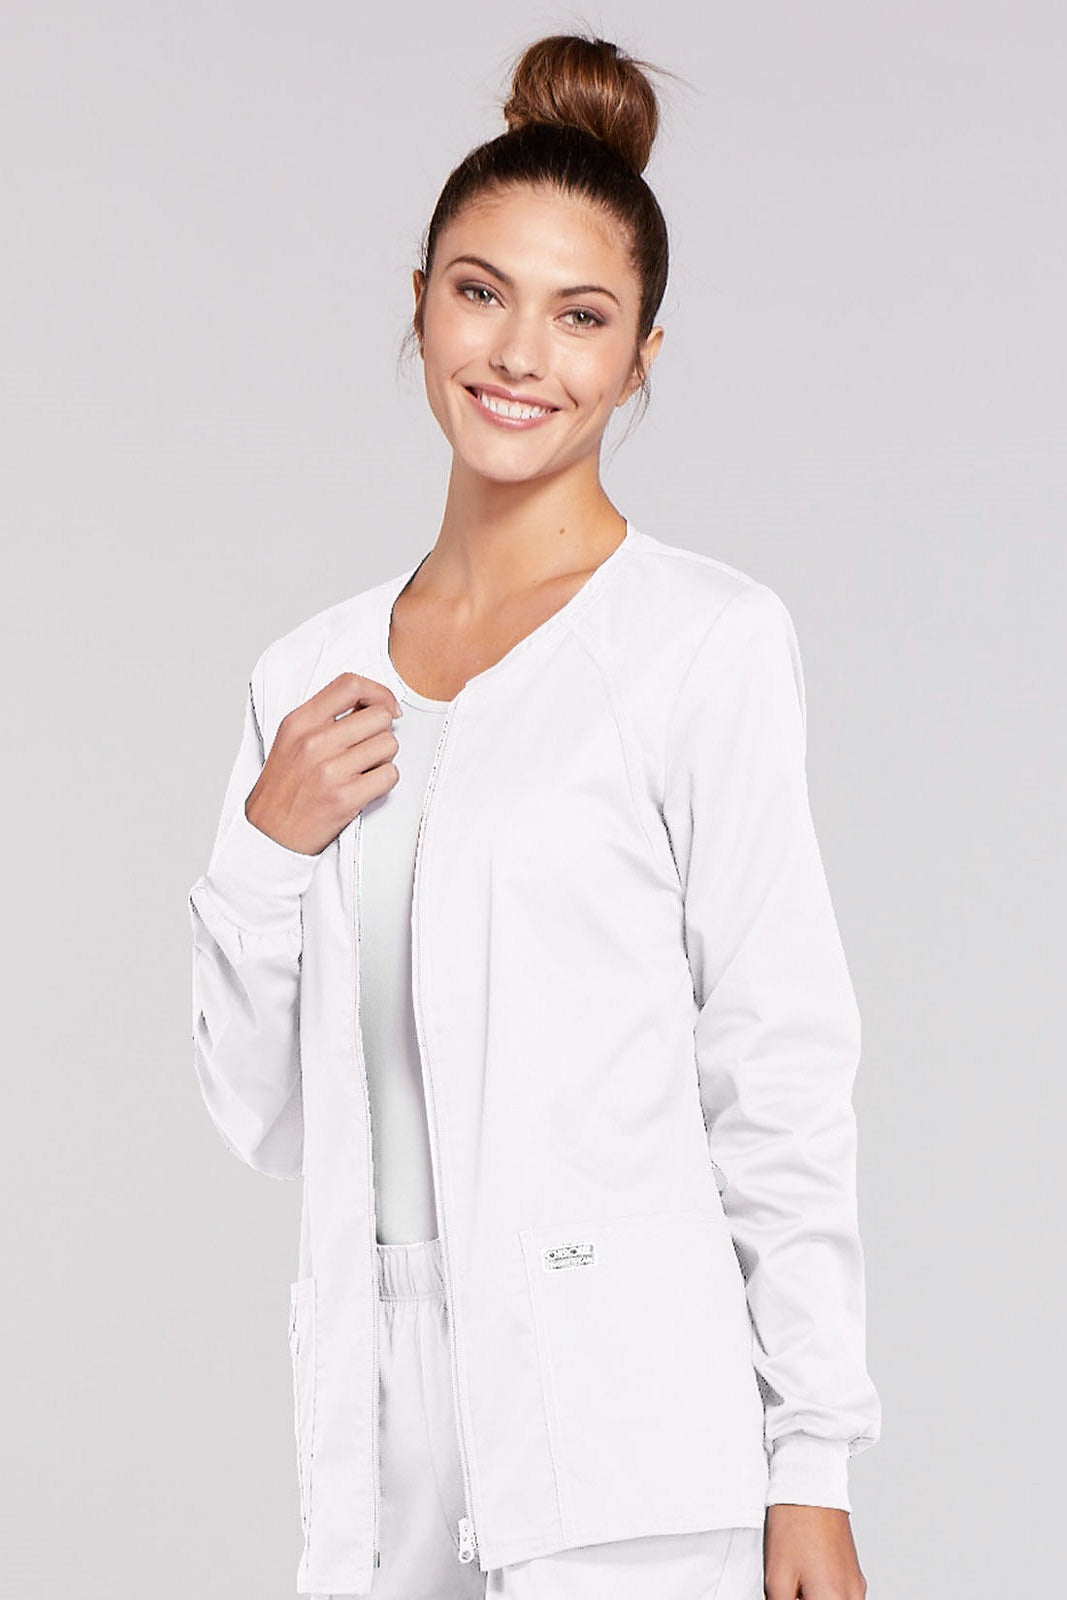 Cherokee Core Stretch Scrub Jacket Zip Front 4315 in White at Parker's Clothing and Shoes.